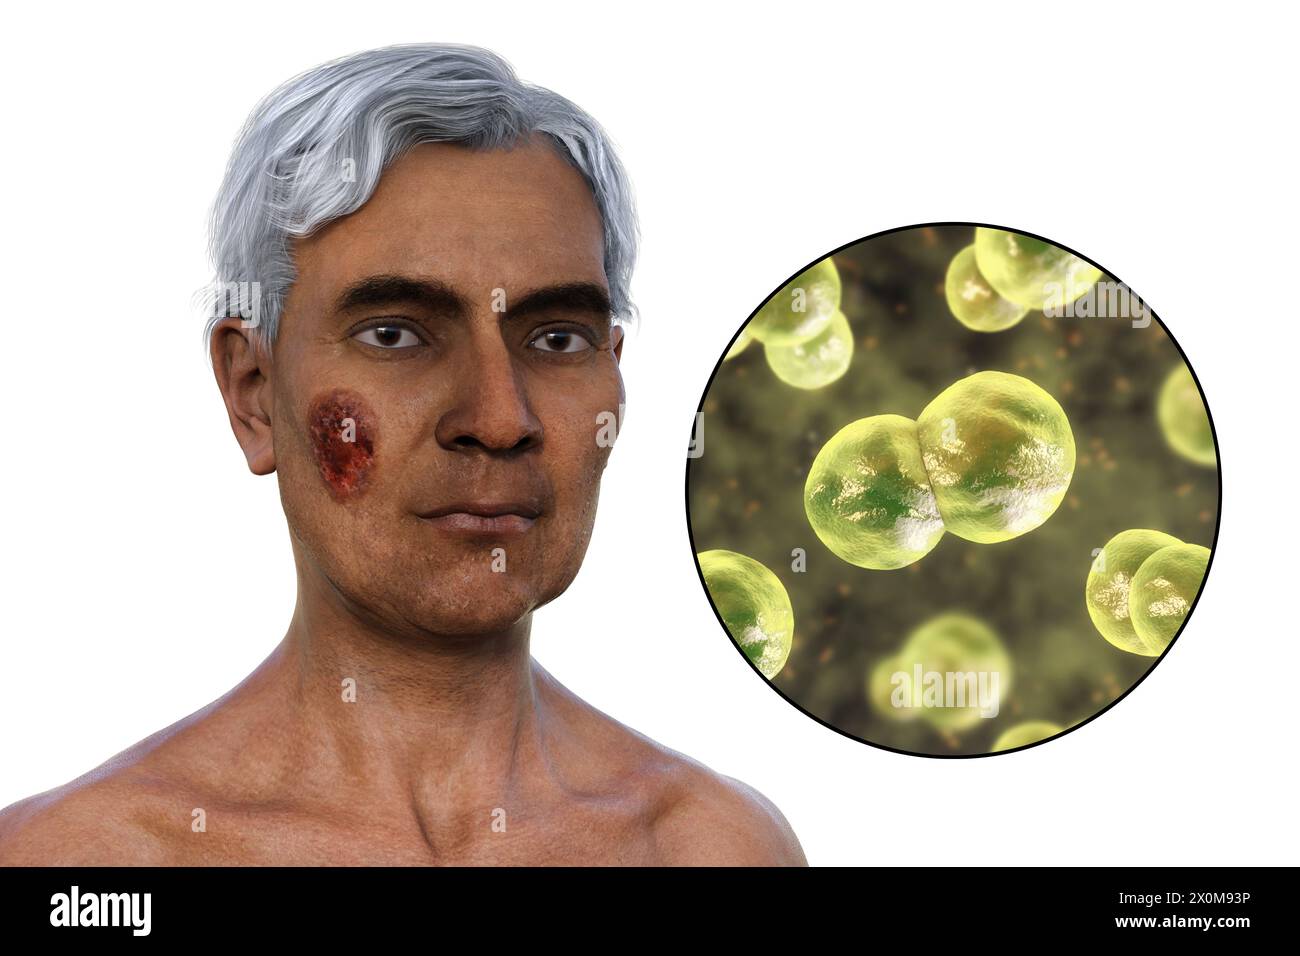 3D illustration of a man with multiple face and neck lesions caused by blastomycosis, and a close-up view of the causative Blastomyces dermatitidis fungi. Blastomycosis is often asymptomatic, but can cause lung problems. In some cases, lesions such as these develop on the skin (cutaneous blastomycosis) which can lead to irreversible scarring. Stock Photo